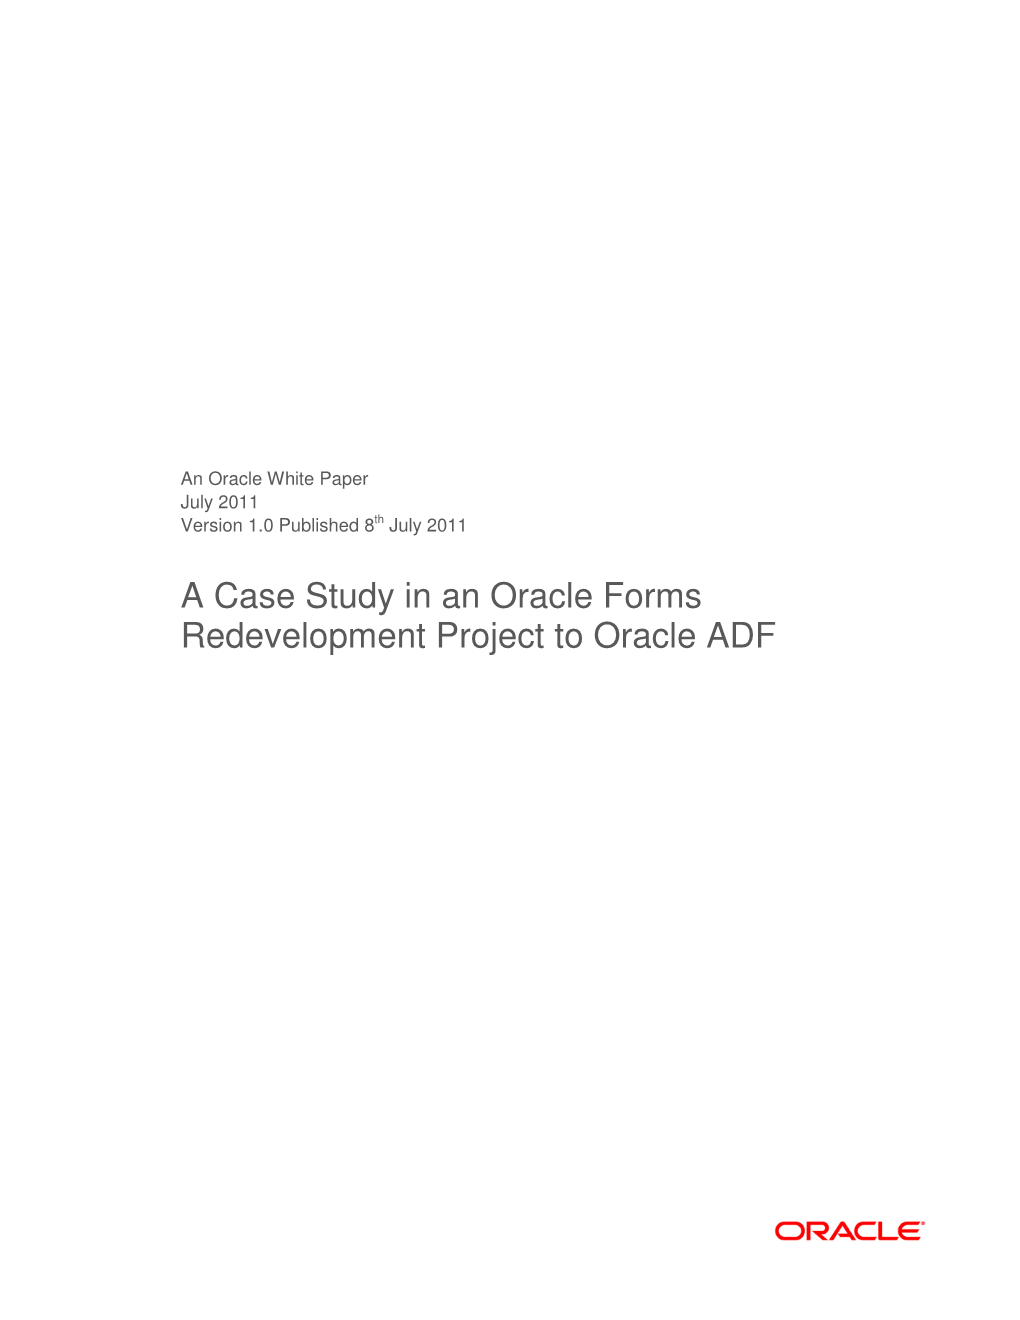 A Case Study in an Oracle Forms Redevelopment Project to Oracle ADF